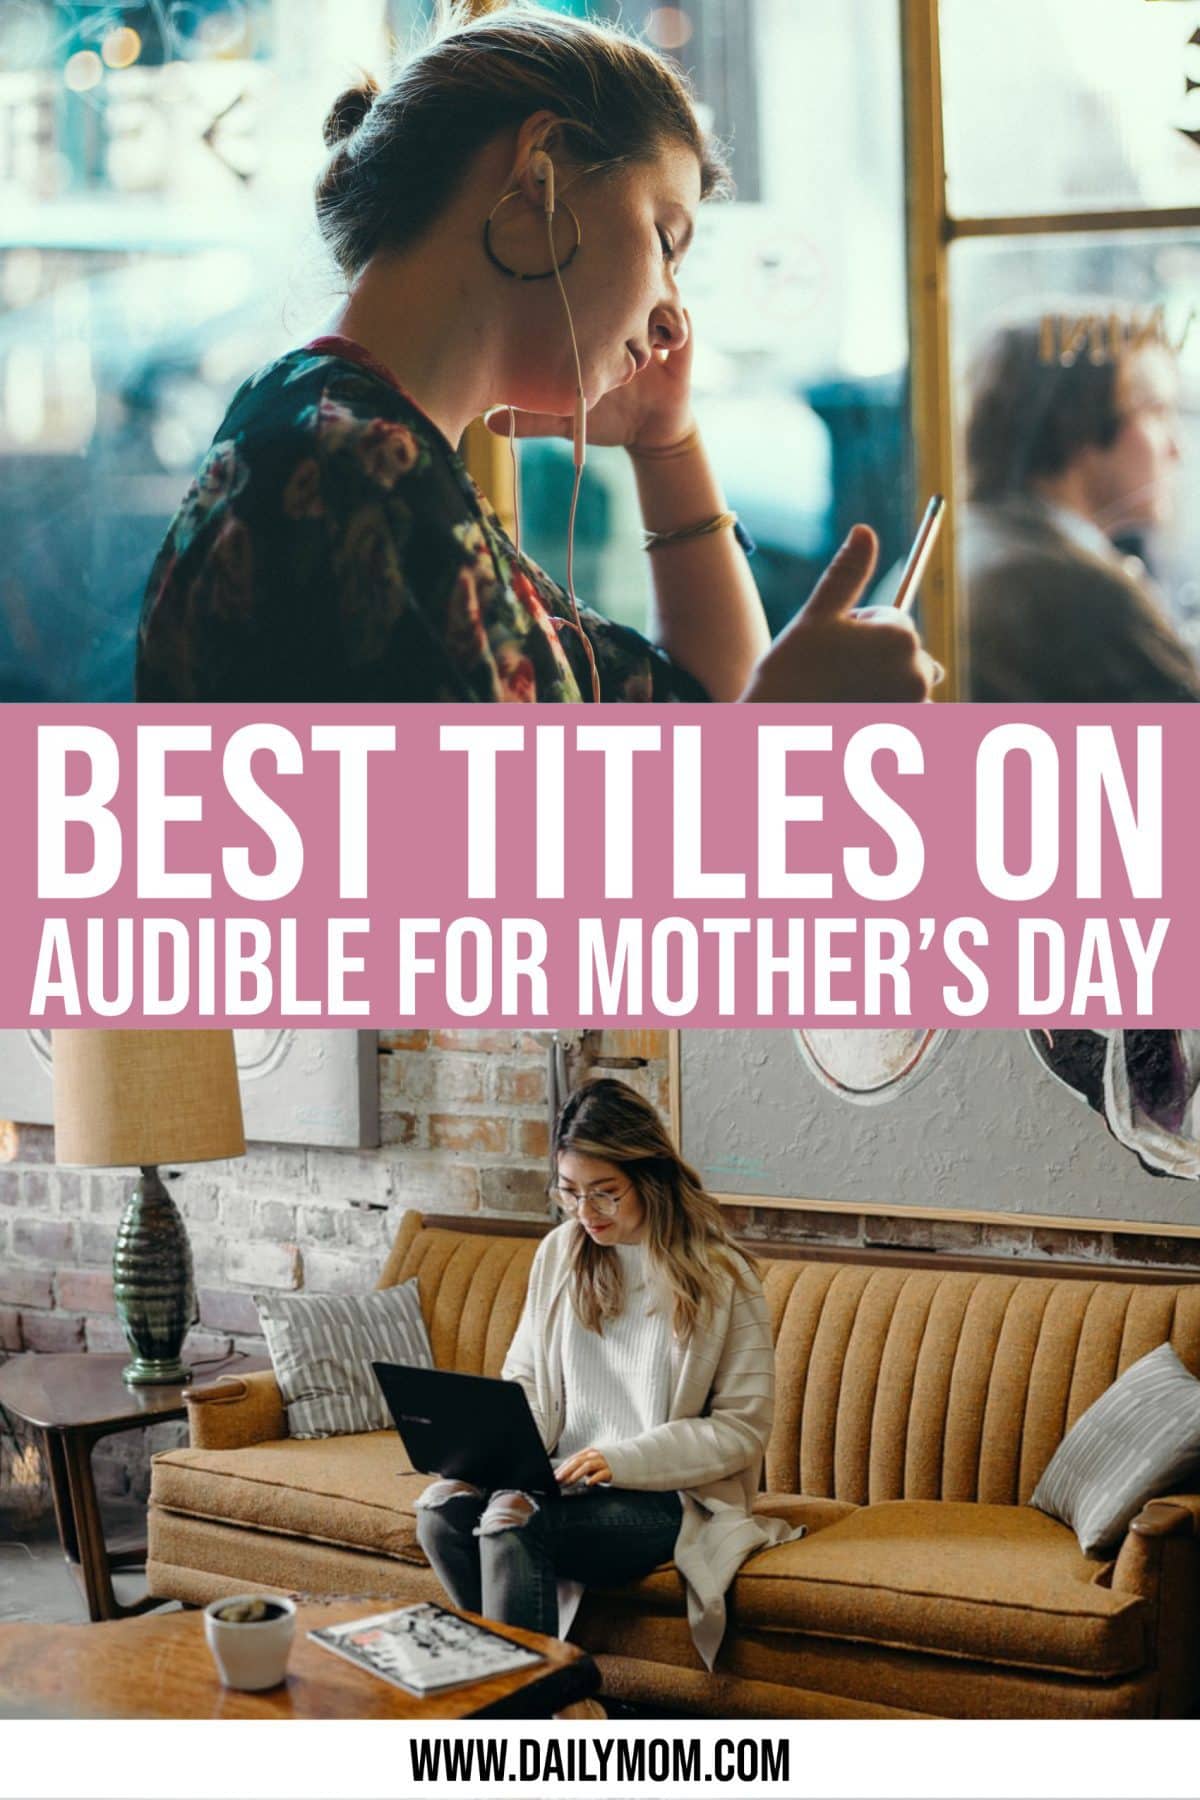 Best Titles On Audible For Mother’s Day